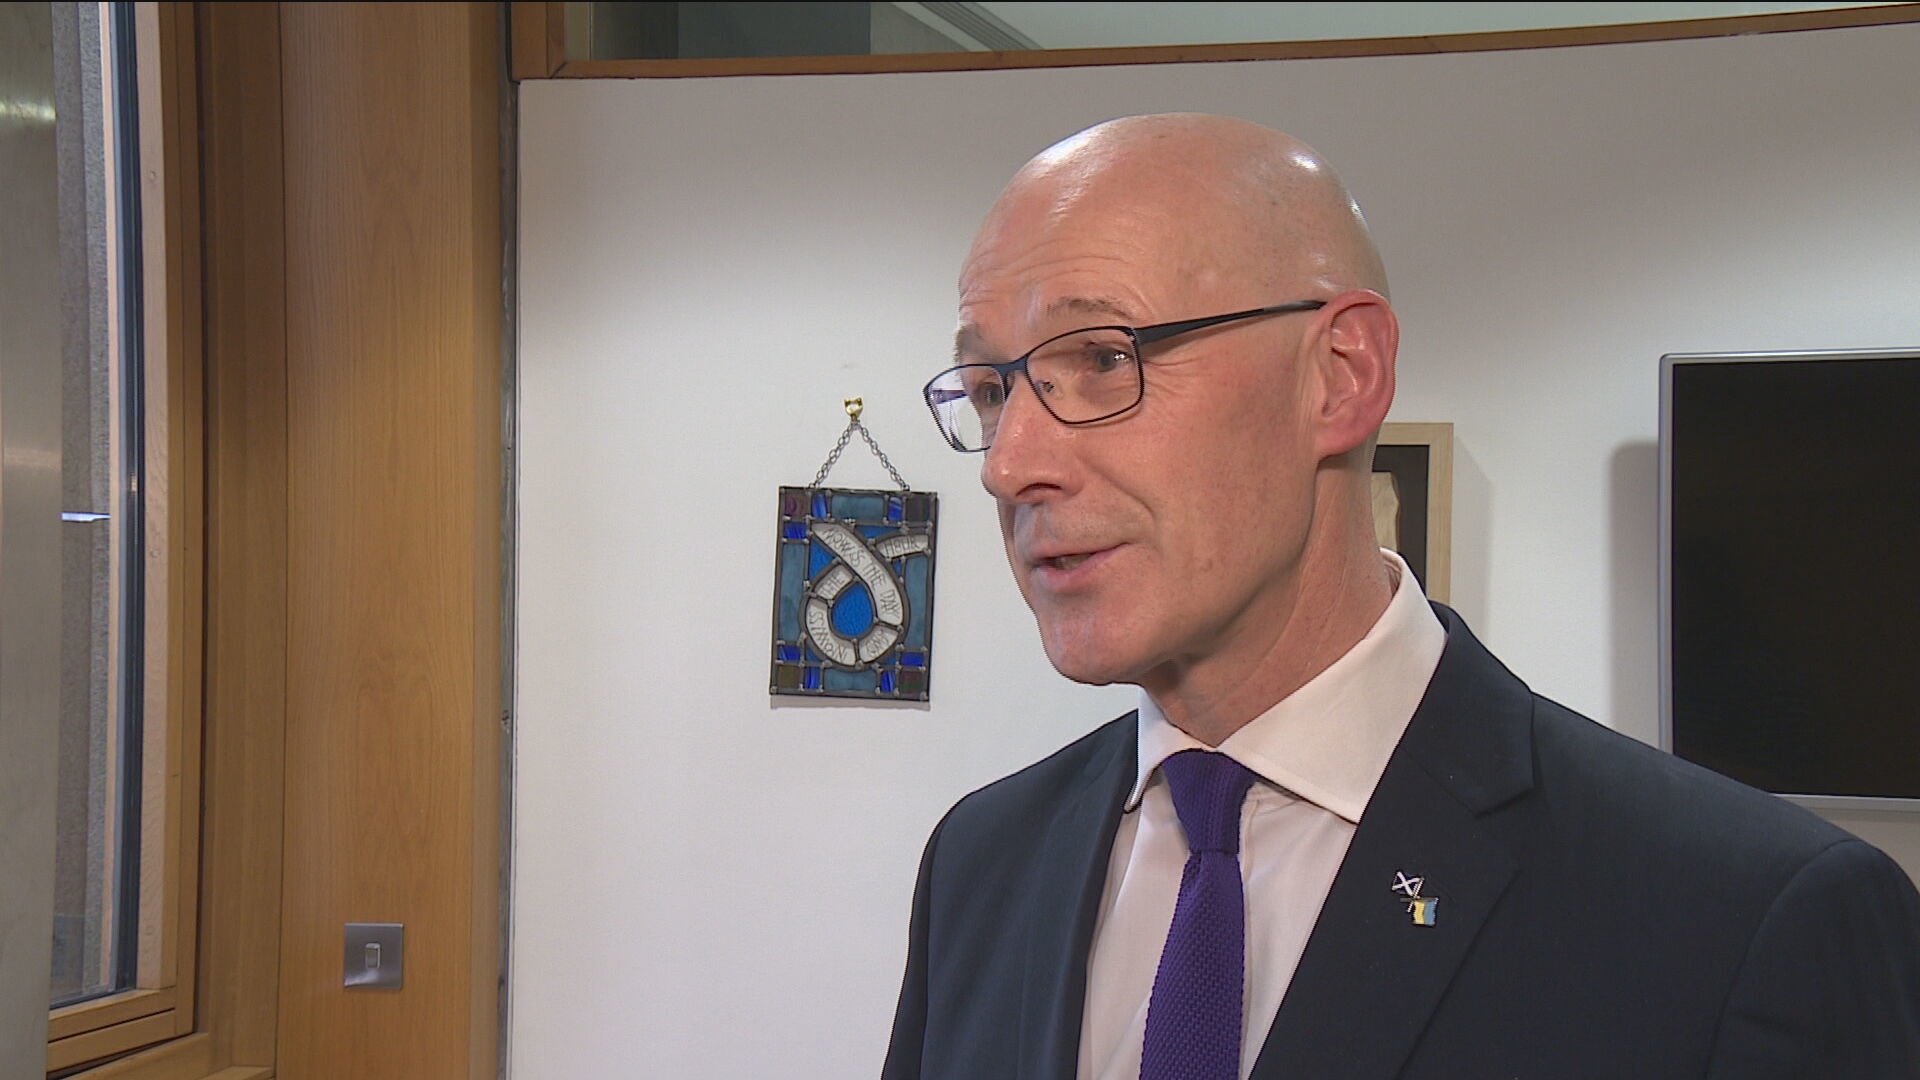 John Swinney said long-term funding for the Scottish Government will fall in real terms.